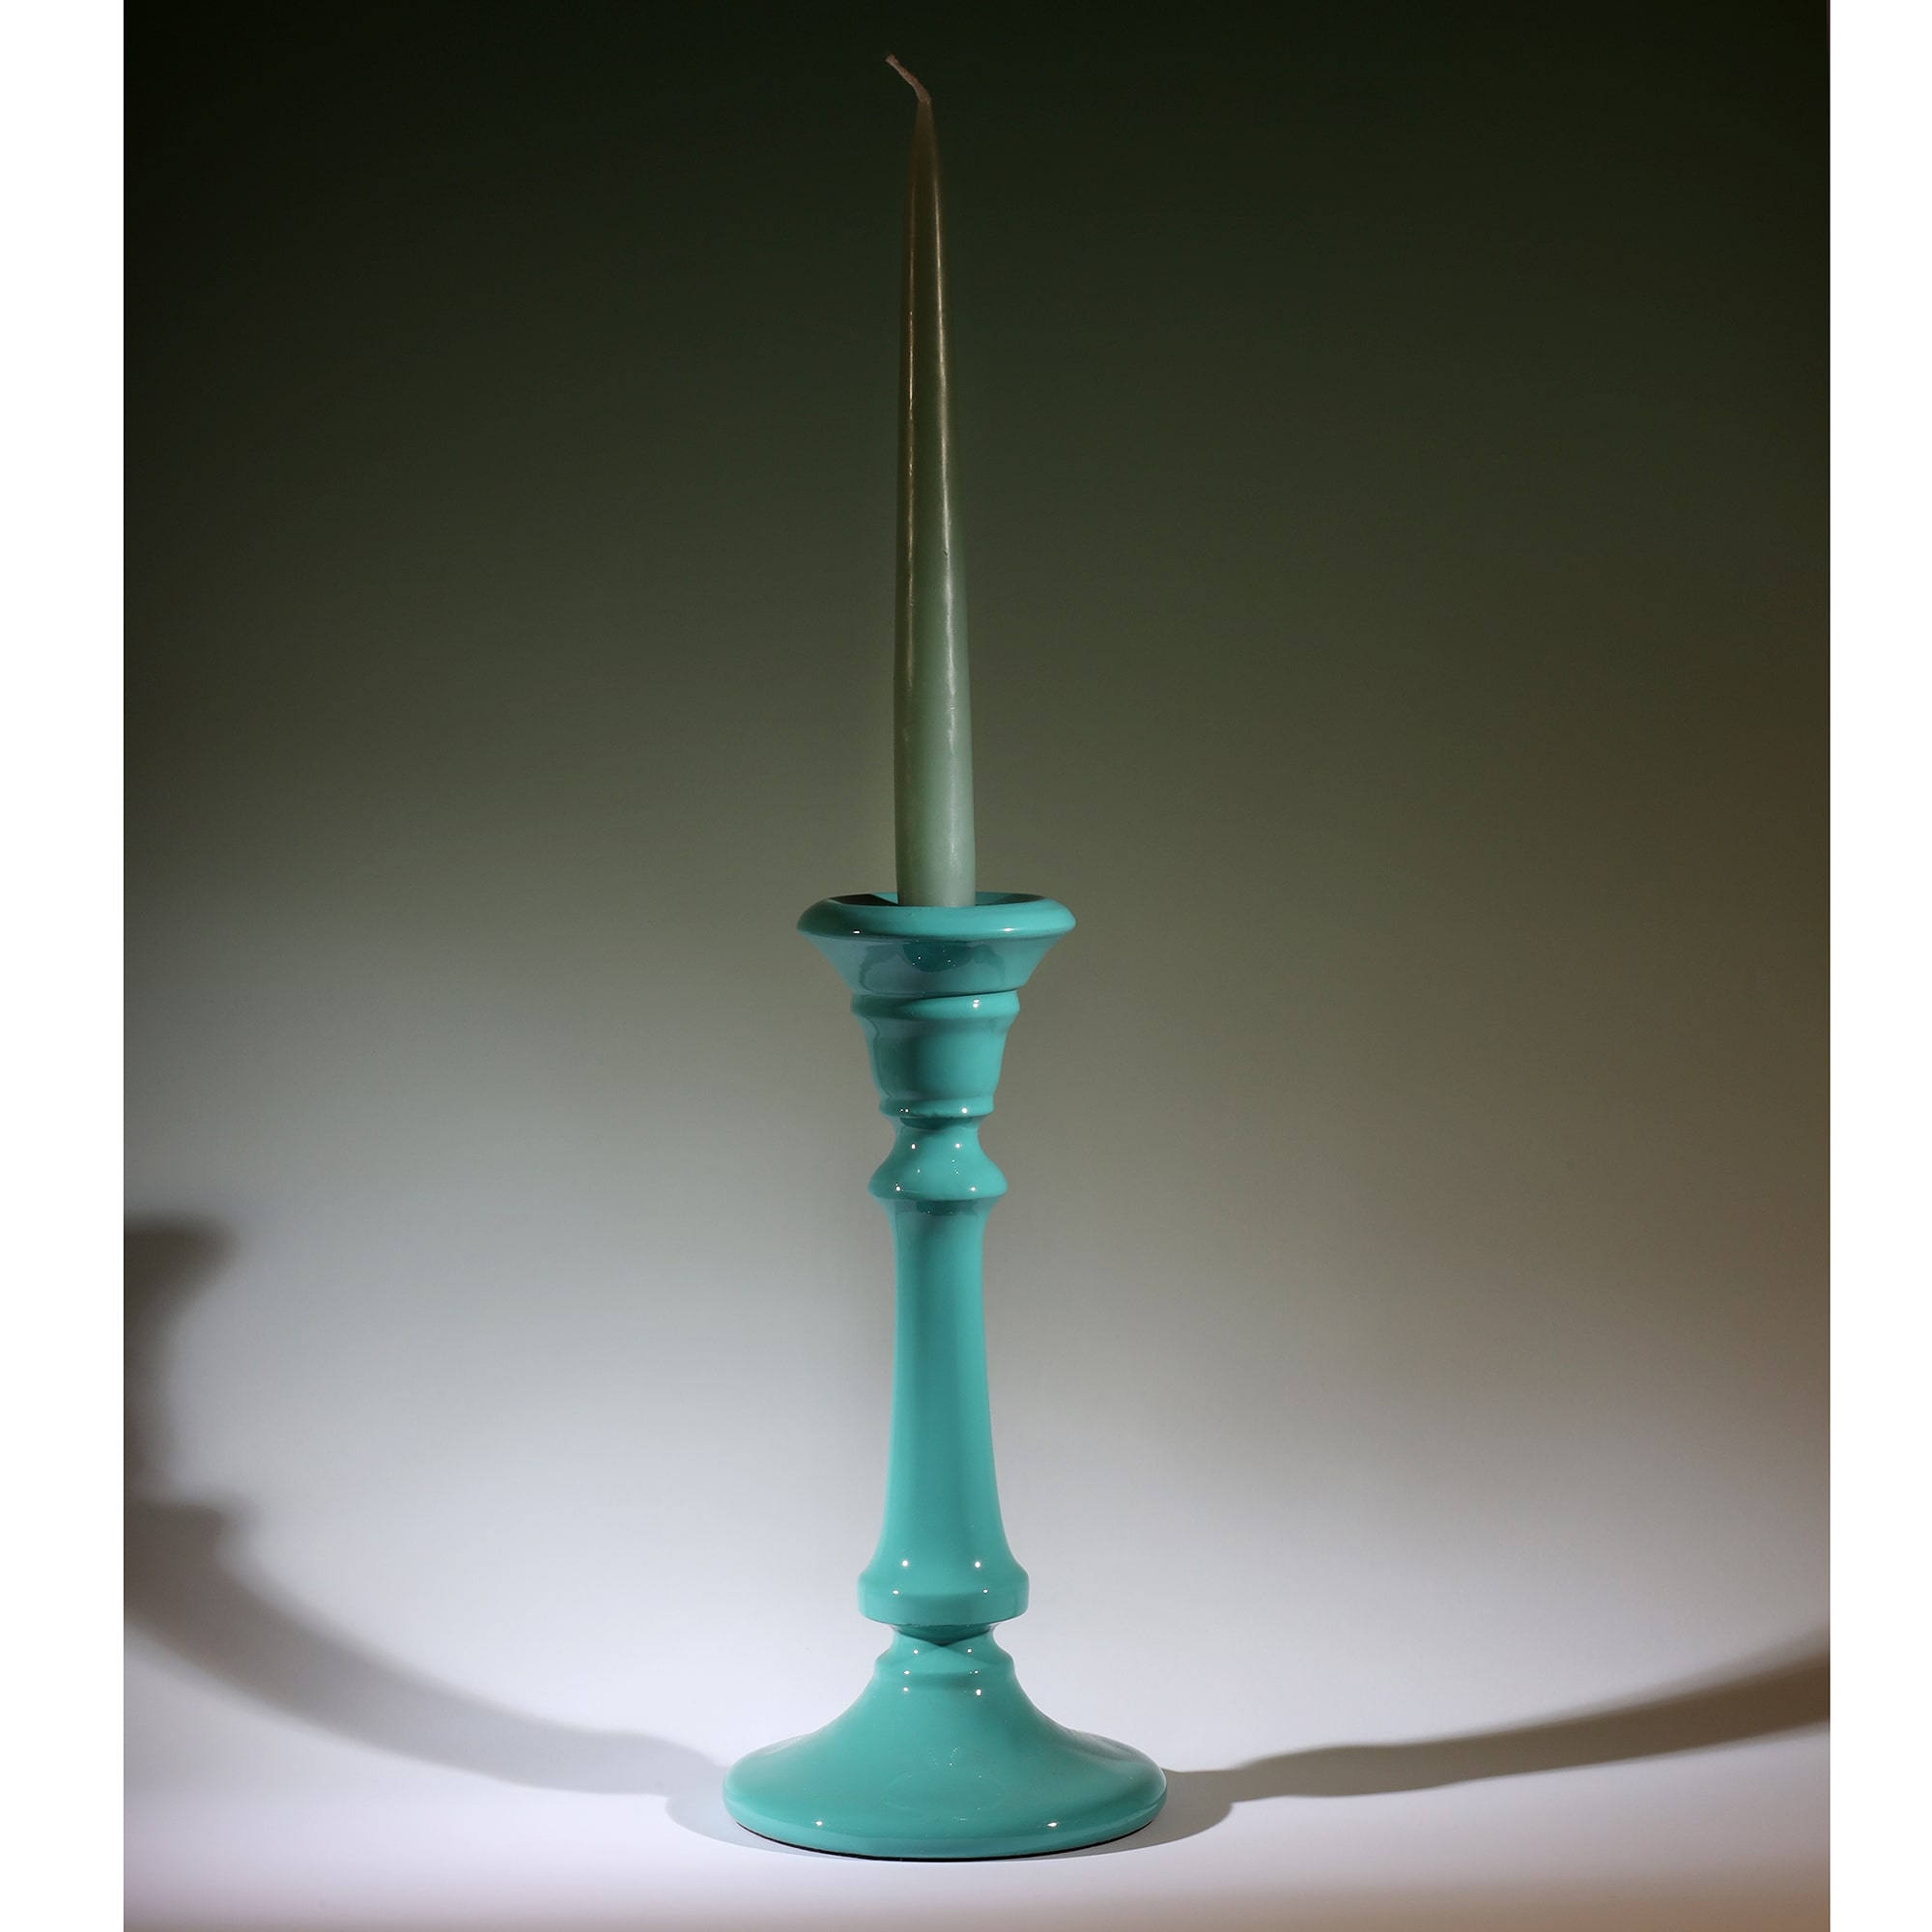 Turquoise Polished Lacquer Tidal Candle holder with a contrasting candle